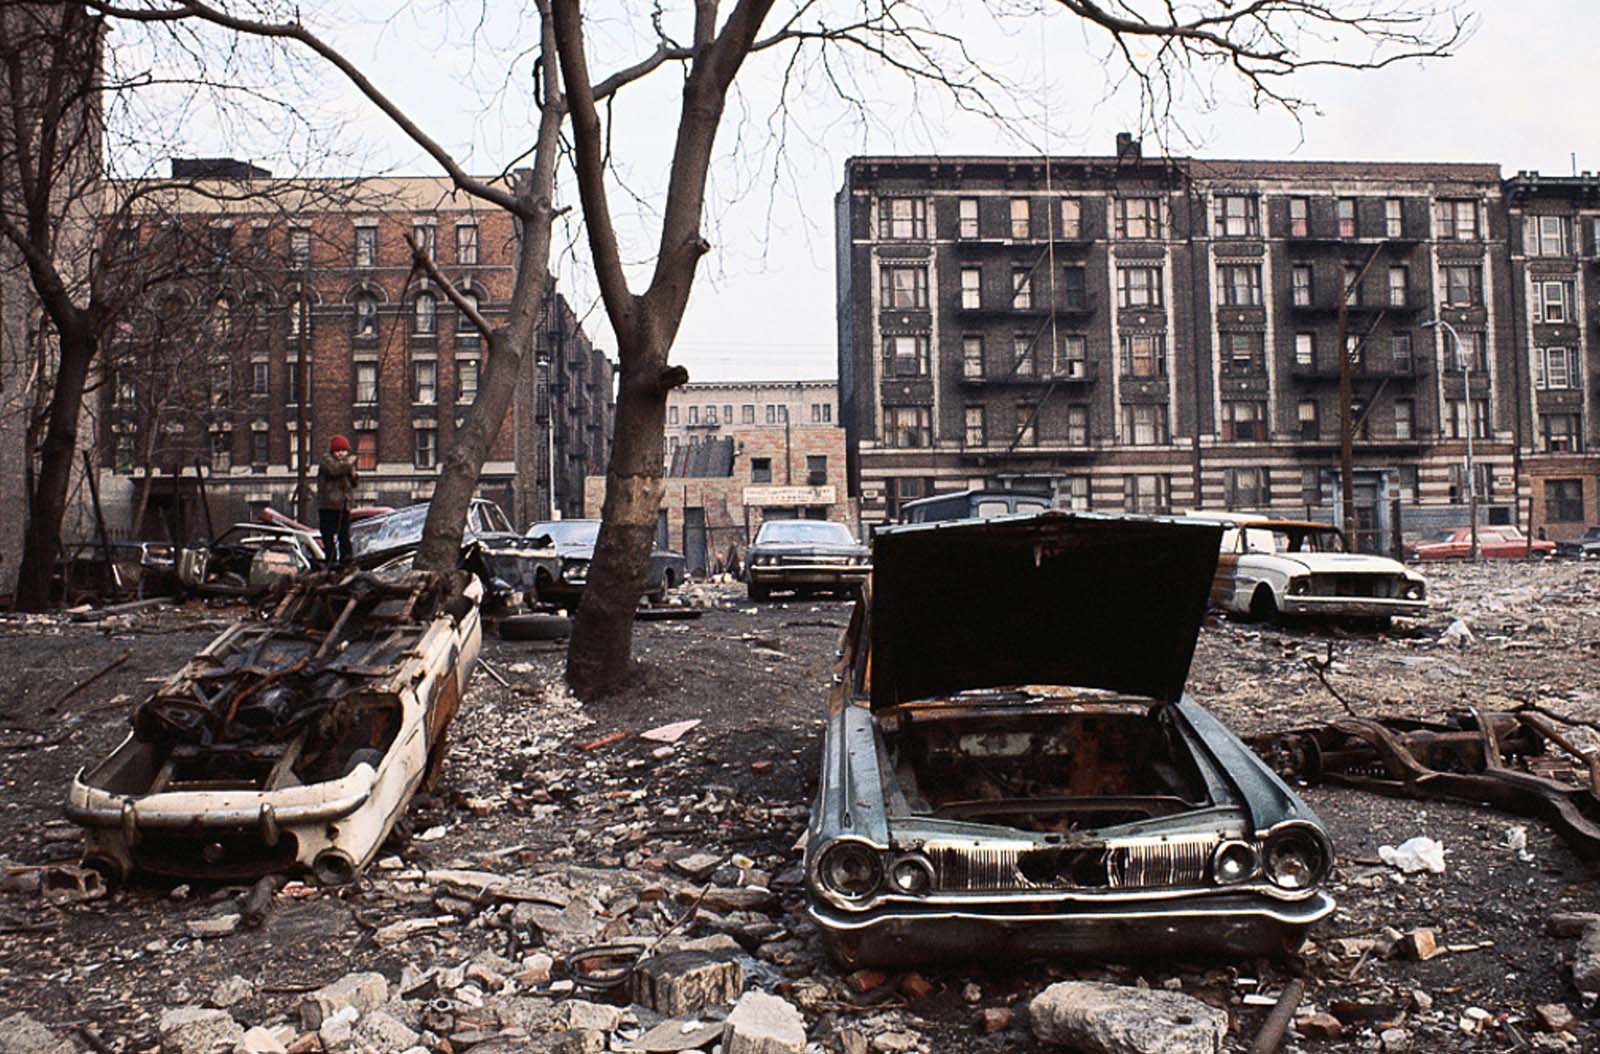 Destruction and Depression: These Photos Show the Everyday Life in 1970s New York City